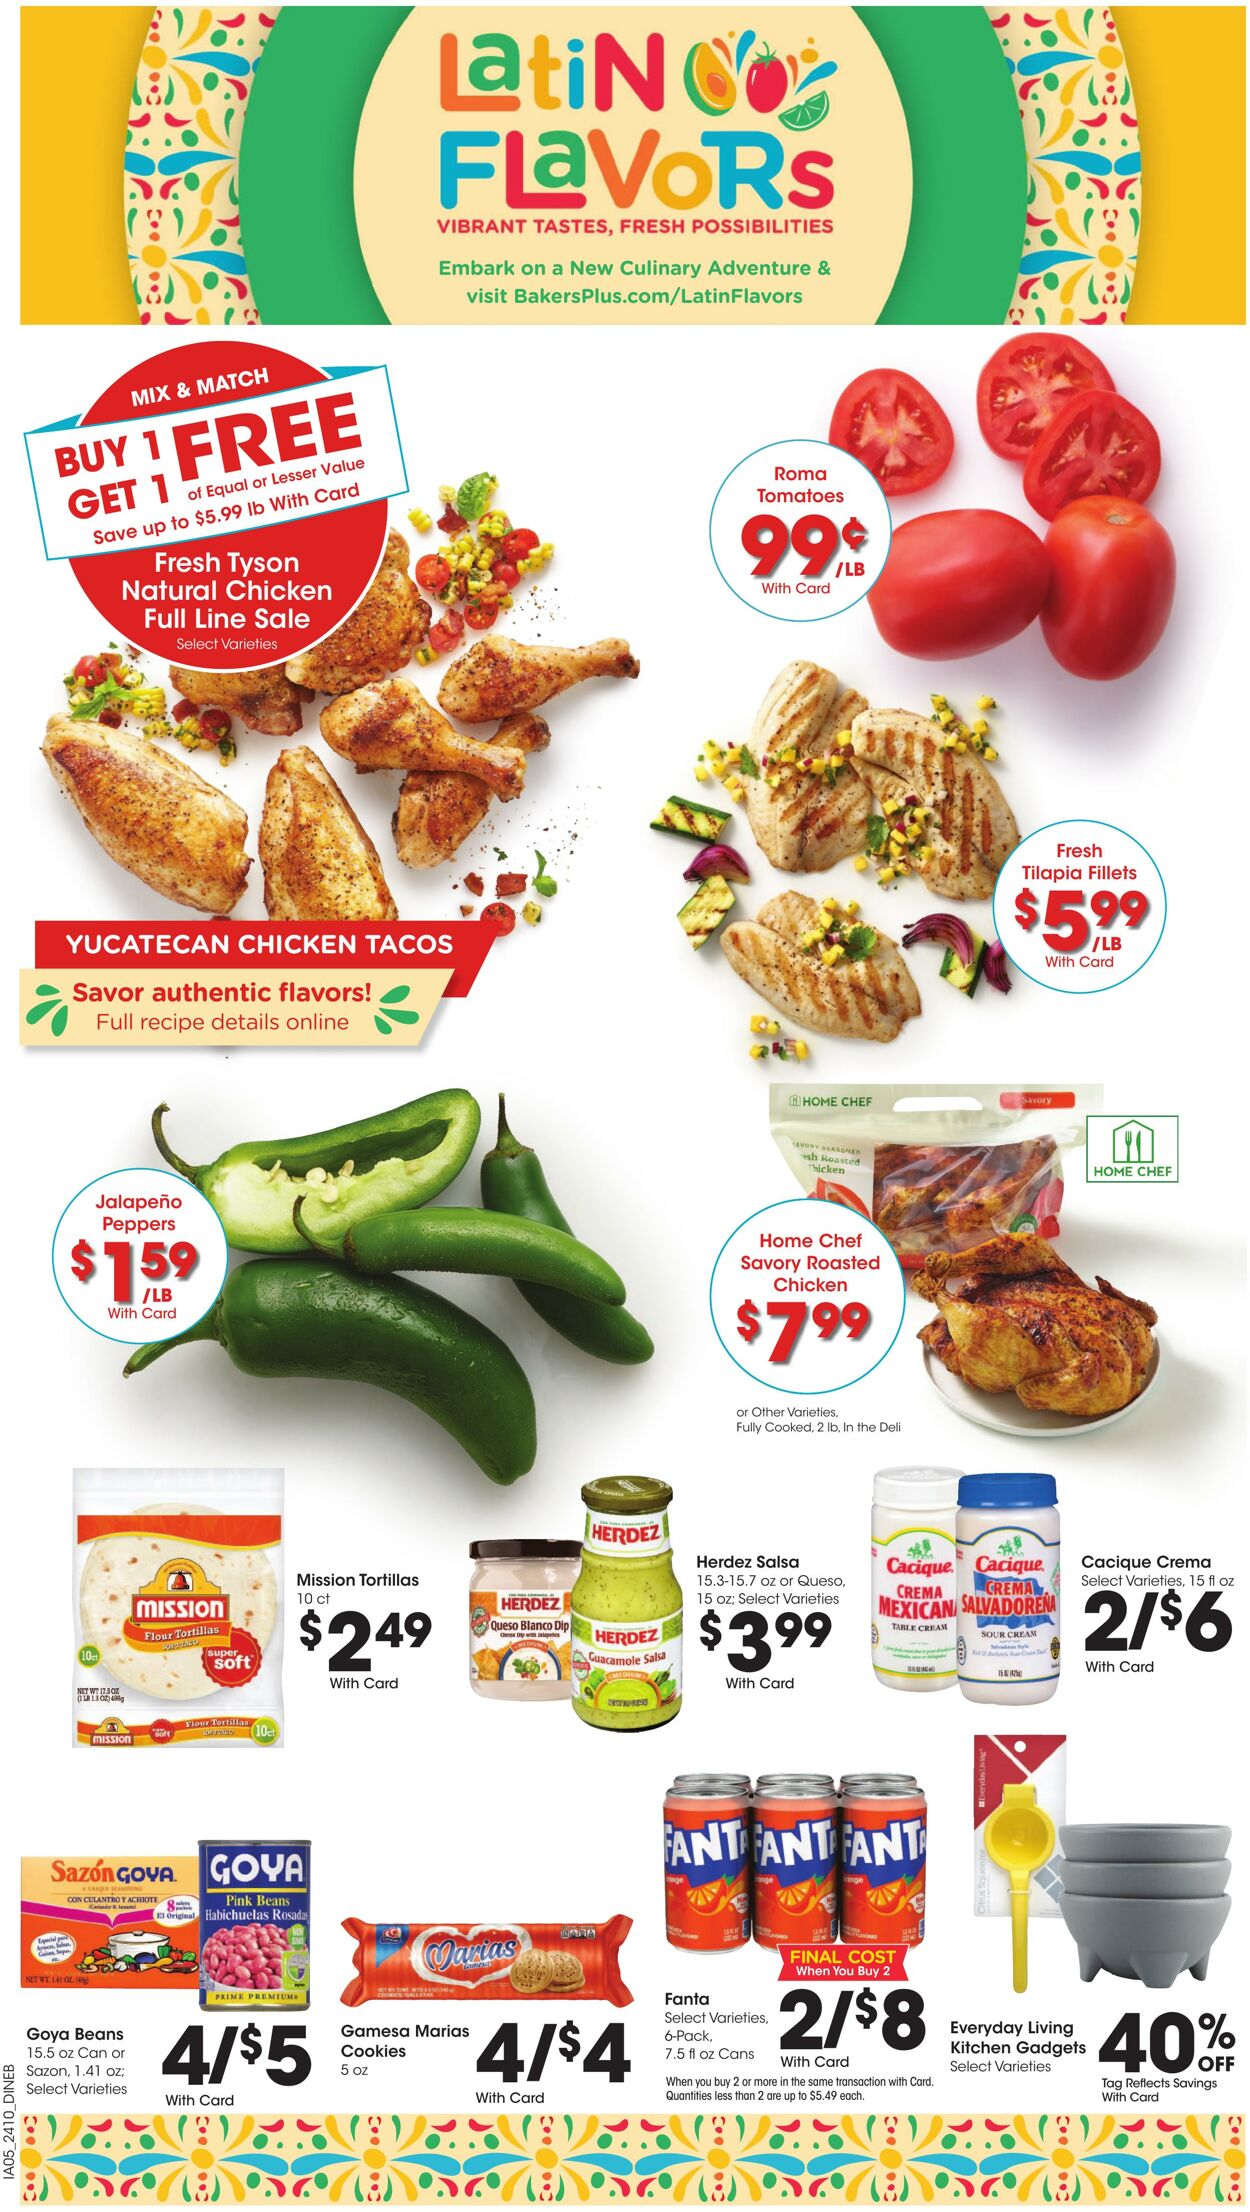 Weekly ad Baker's 04/10/2024 - 04/16/2024